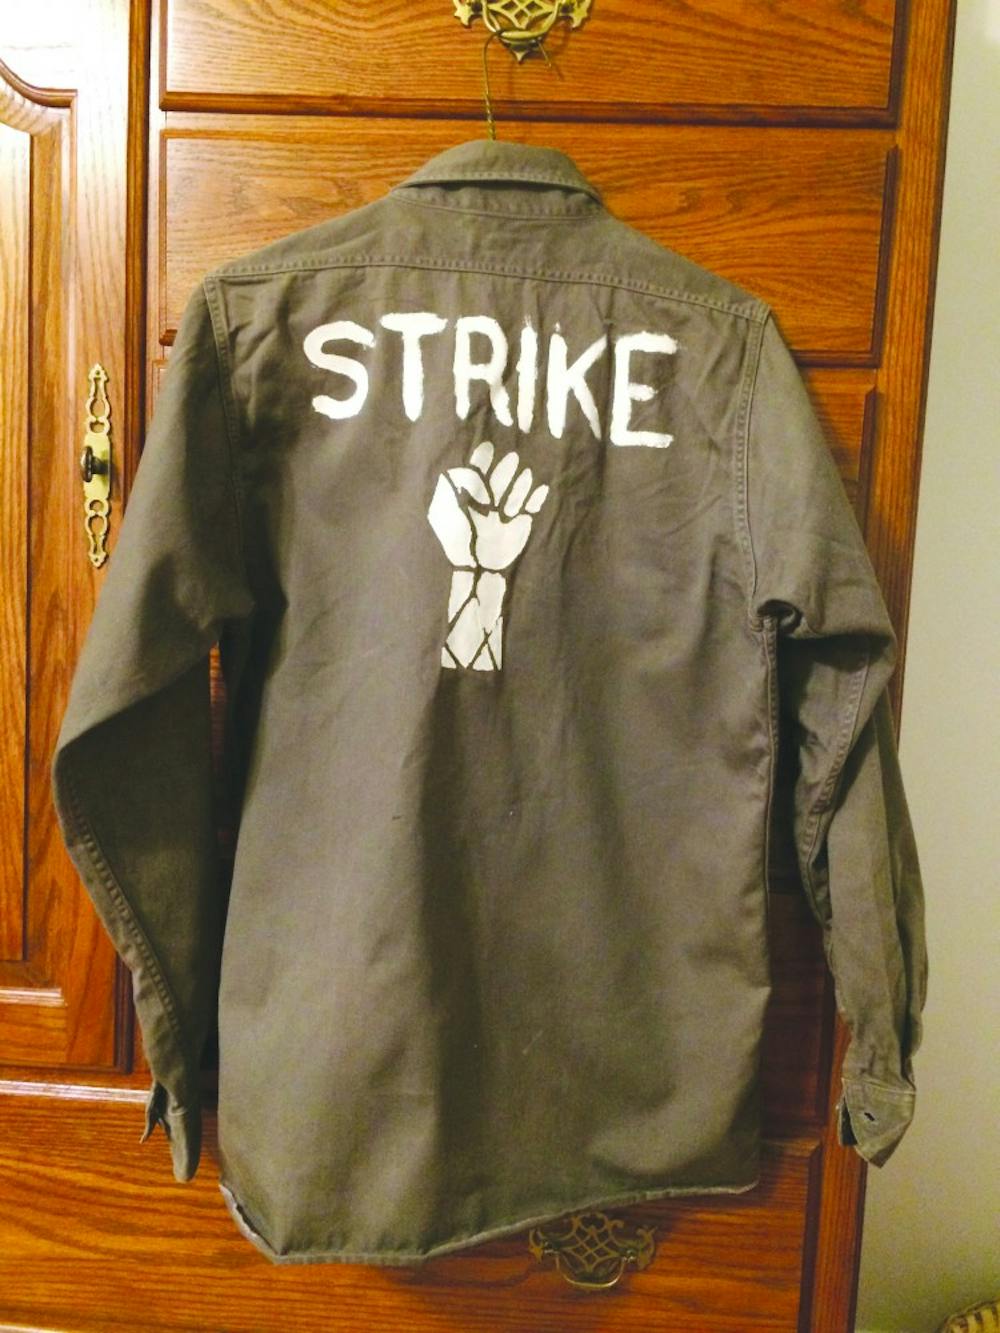 Then-junior student and Ball State VMC president Mary Posner still has the 'strike' shirt she wore to the Vietnam "teach-in" demonstration Ball State held in response to Kent State shootings on May 7, 1970. Photo provided, Mary Posner